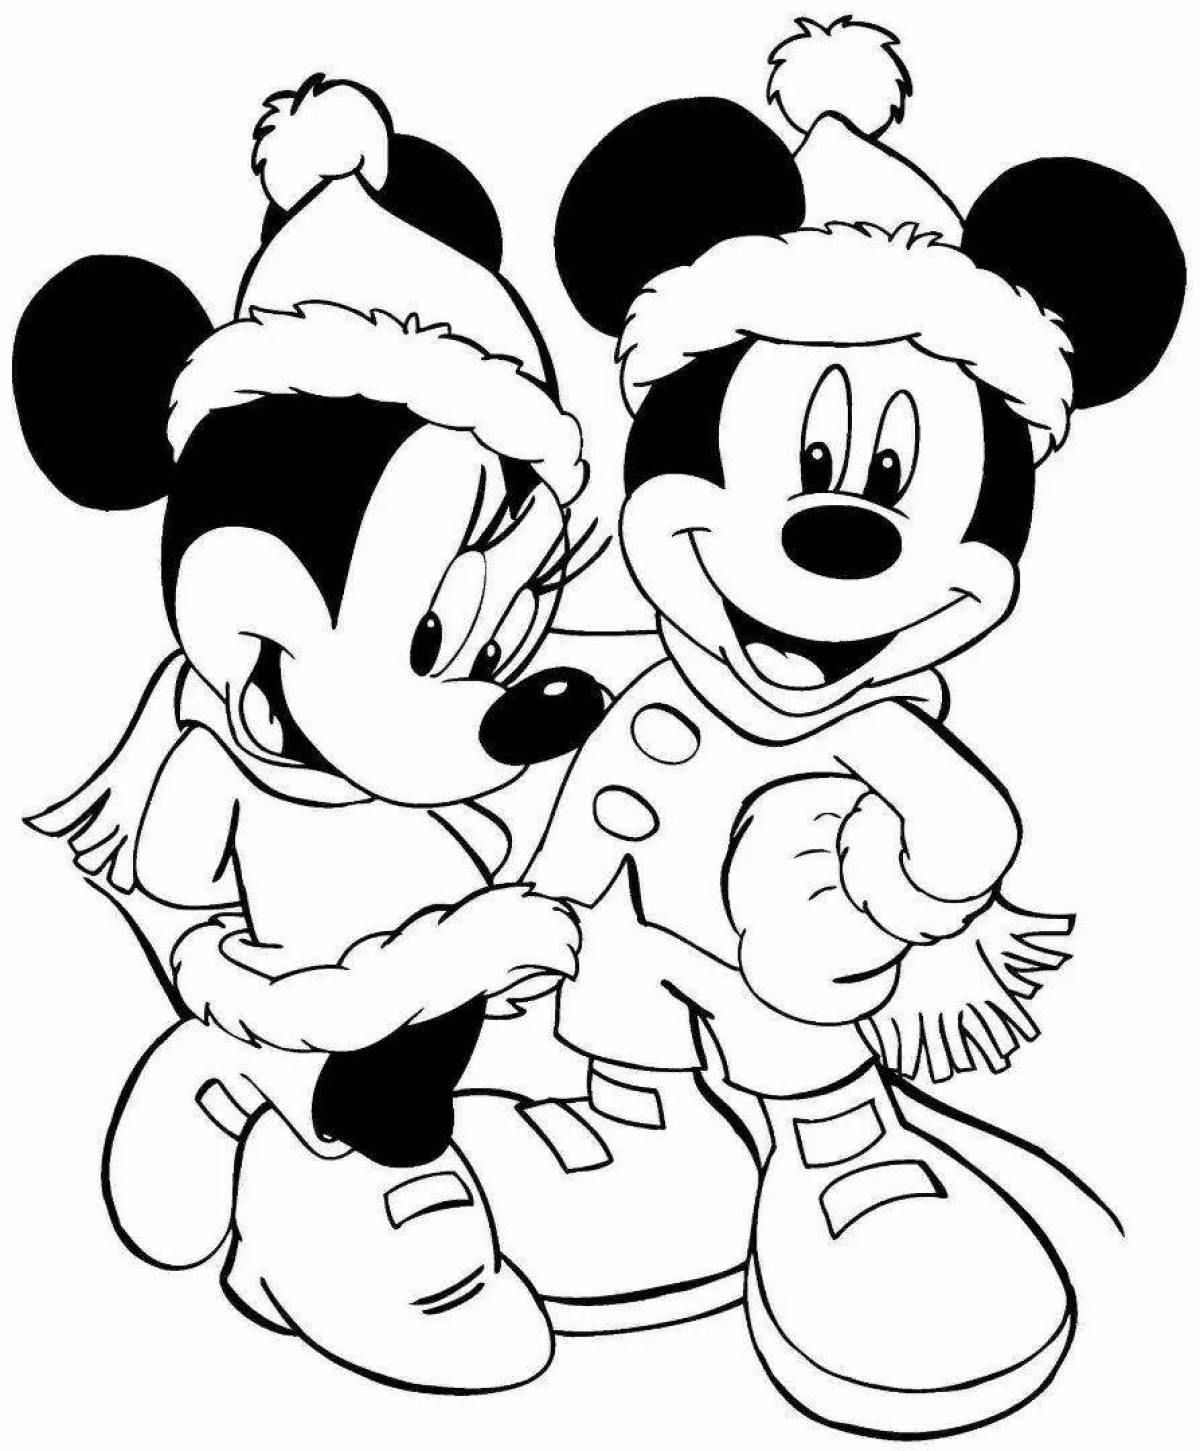 Luxury mickey mouse christmas coloring book